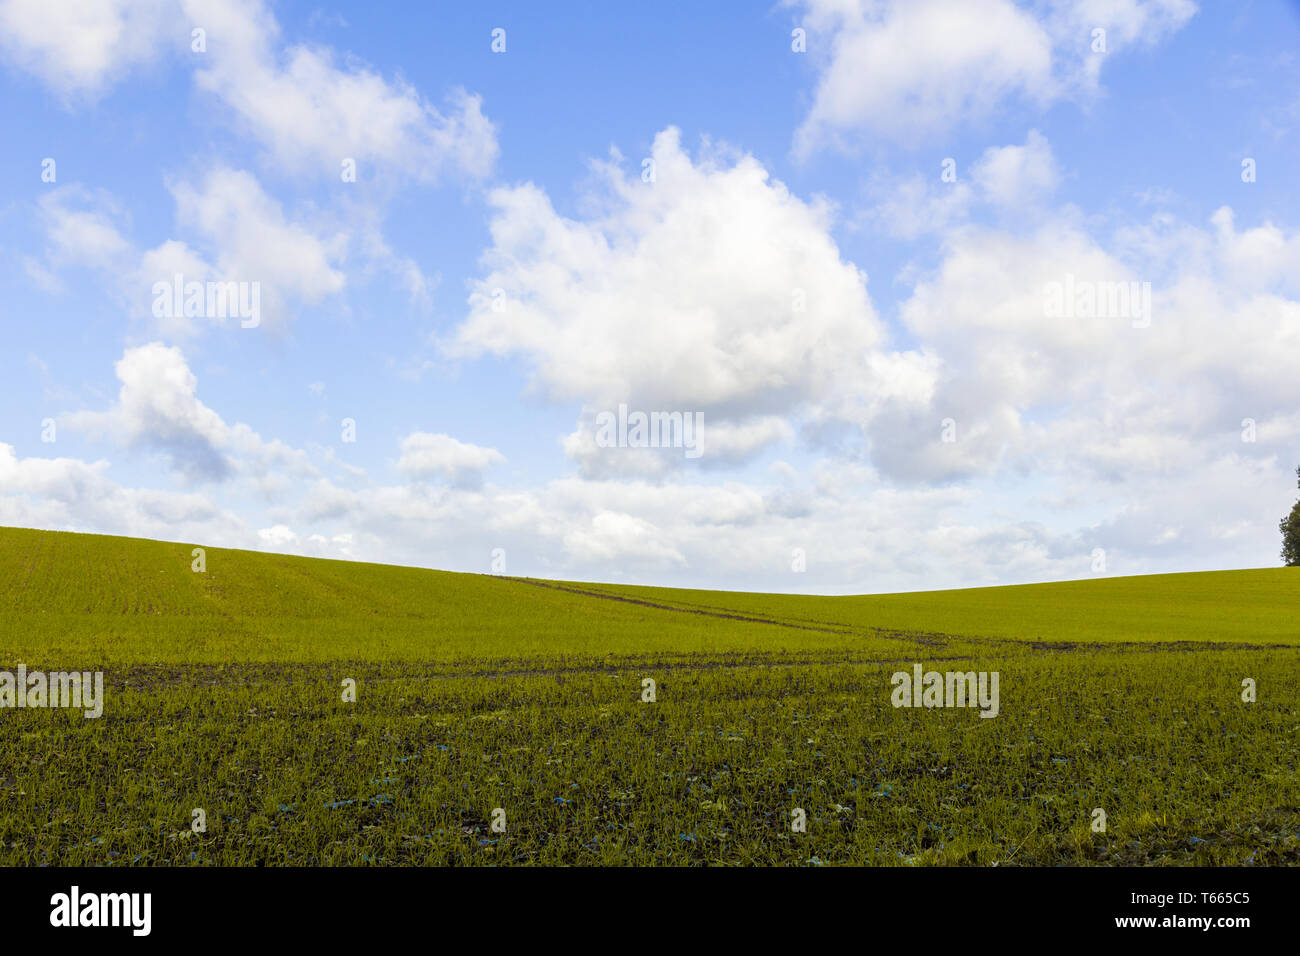 silhouette of a light hill against a blue cloudy sky Stock Photo